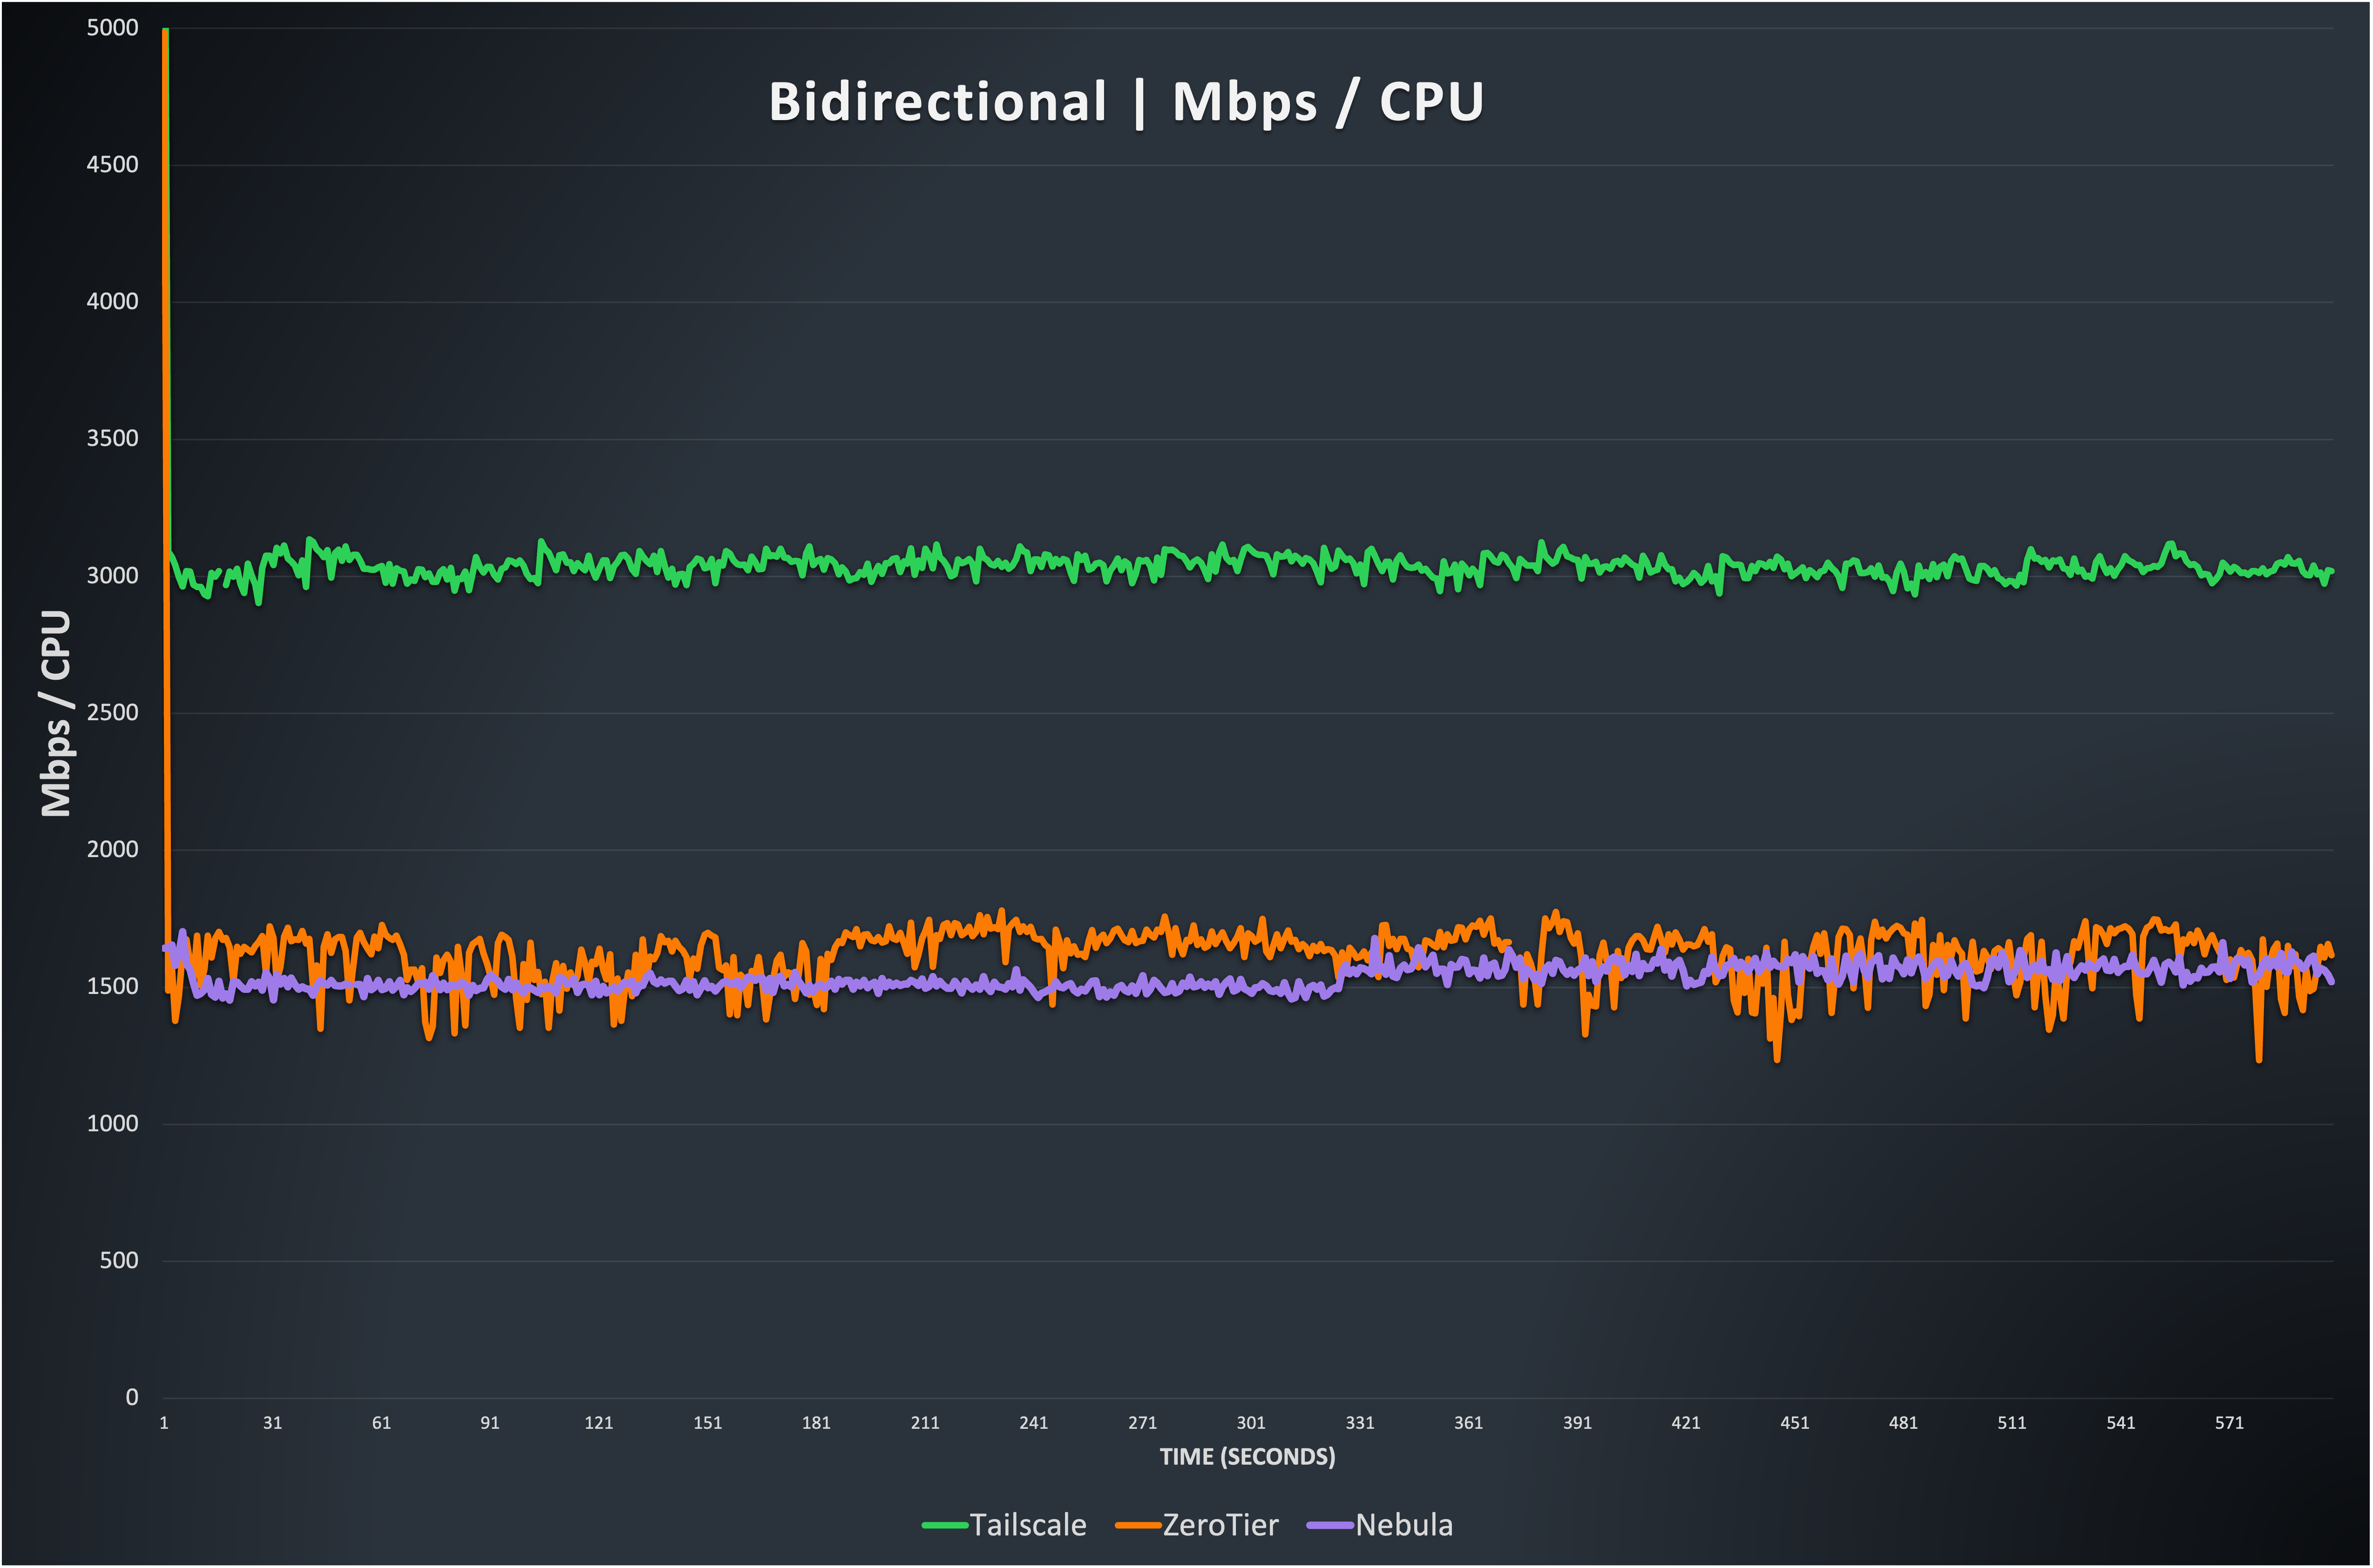 Line graph showing the efficiency of bidrectional traffic handling in Mbps per CPU core of Nebula, Tailscale, and ZeroTier.  Nebula and ZeroTier stay around 1500 Mbps/CPU, whereas Tailscale is just above 3000 Mbps/CPU.